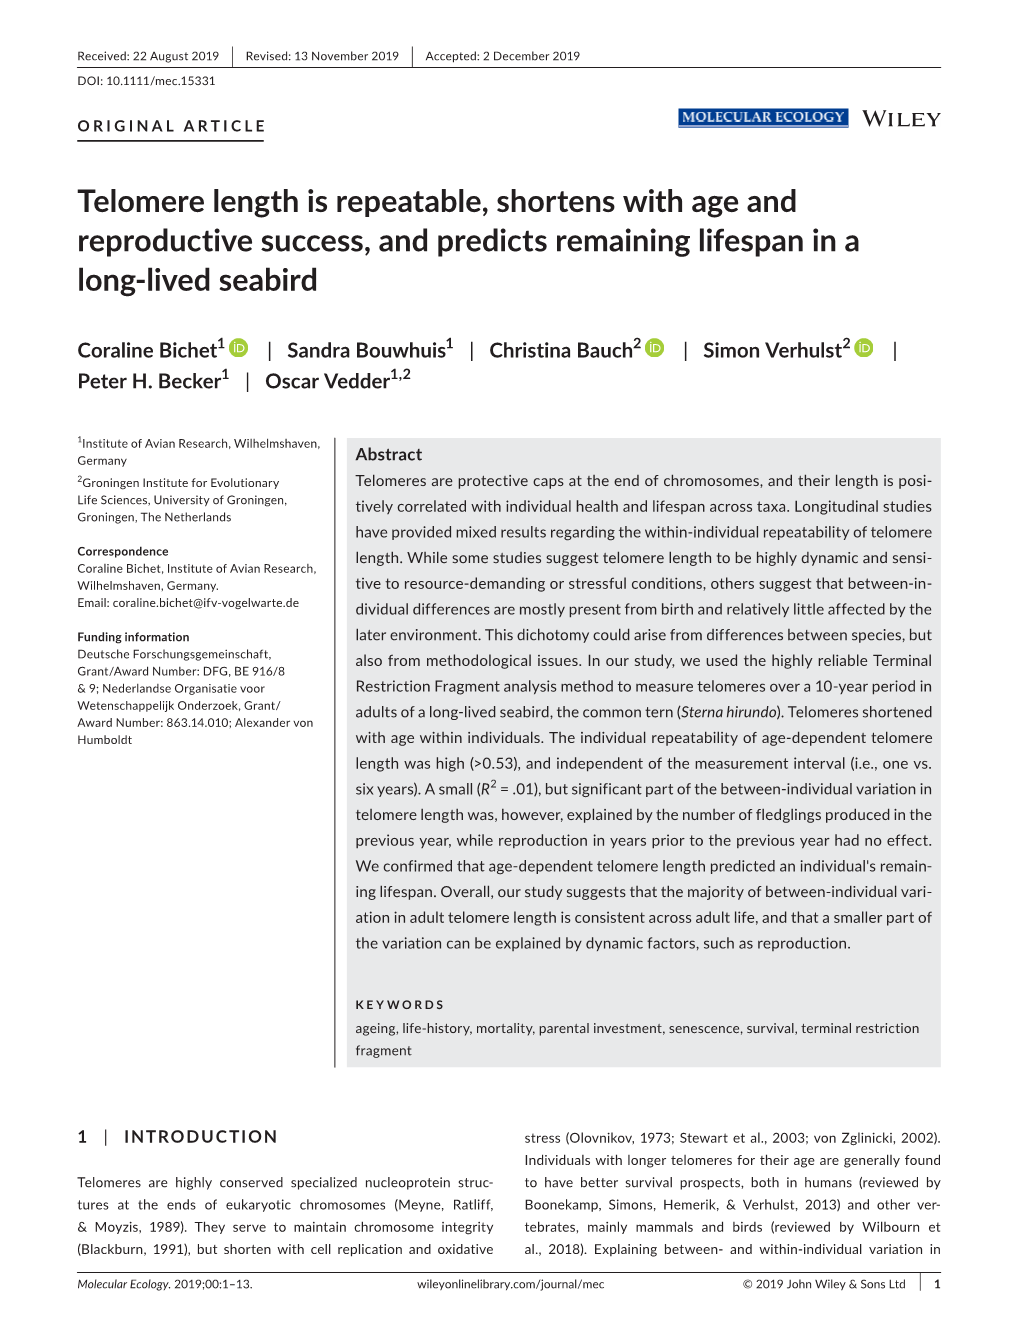 Telomere Length Is Repeatable, Shortens with Age and Reproductive Success, and Predicts Remaining Lifespan in a Long-Lived Seabird